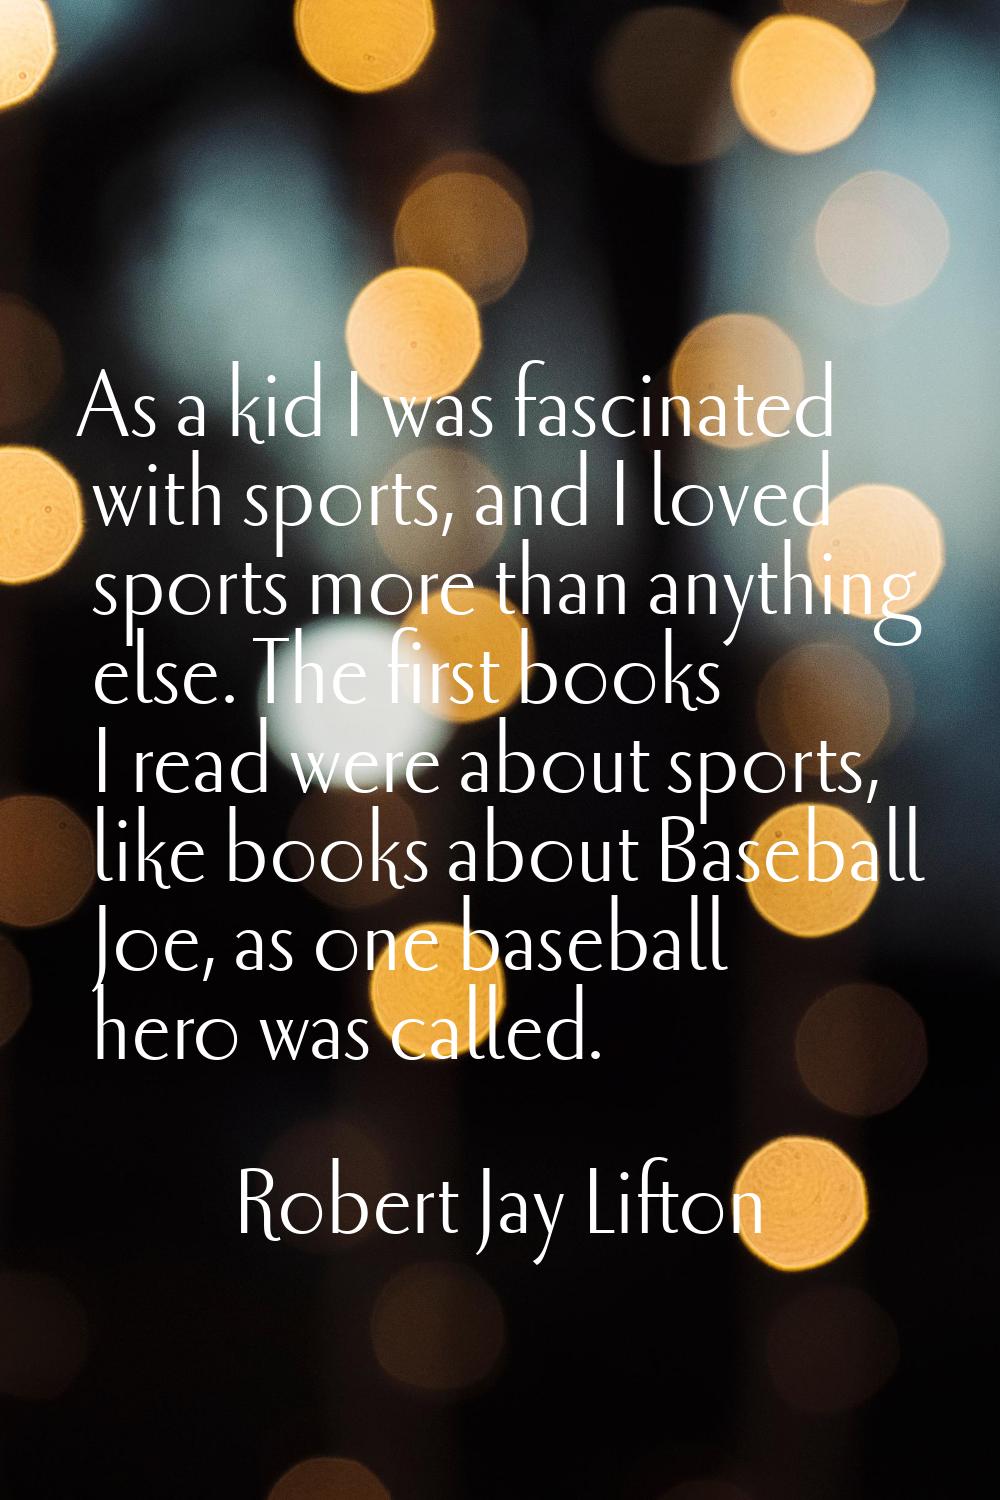 As a kid I was fascinated with sports, and I loved sports more than anything else. The first books 